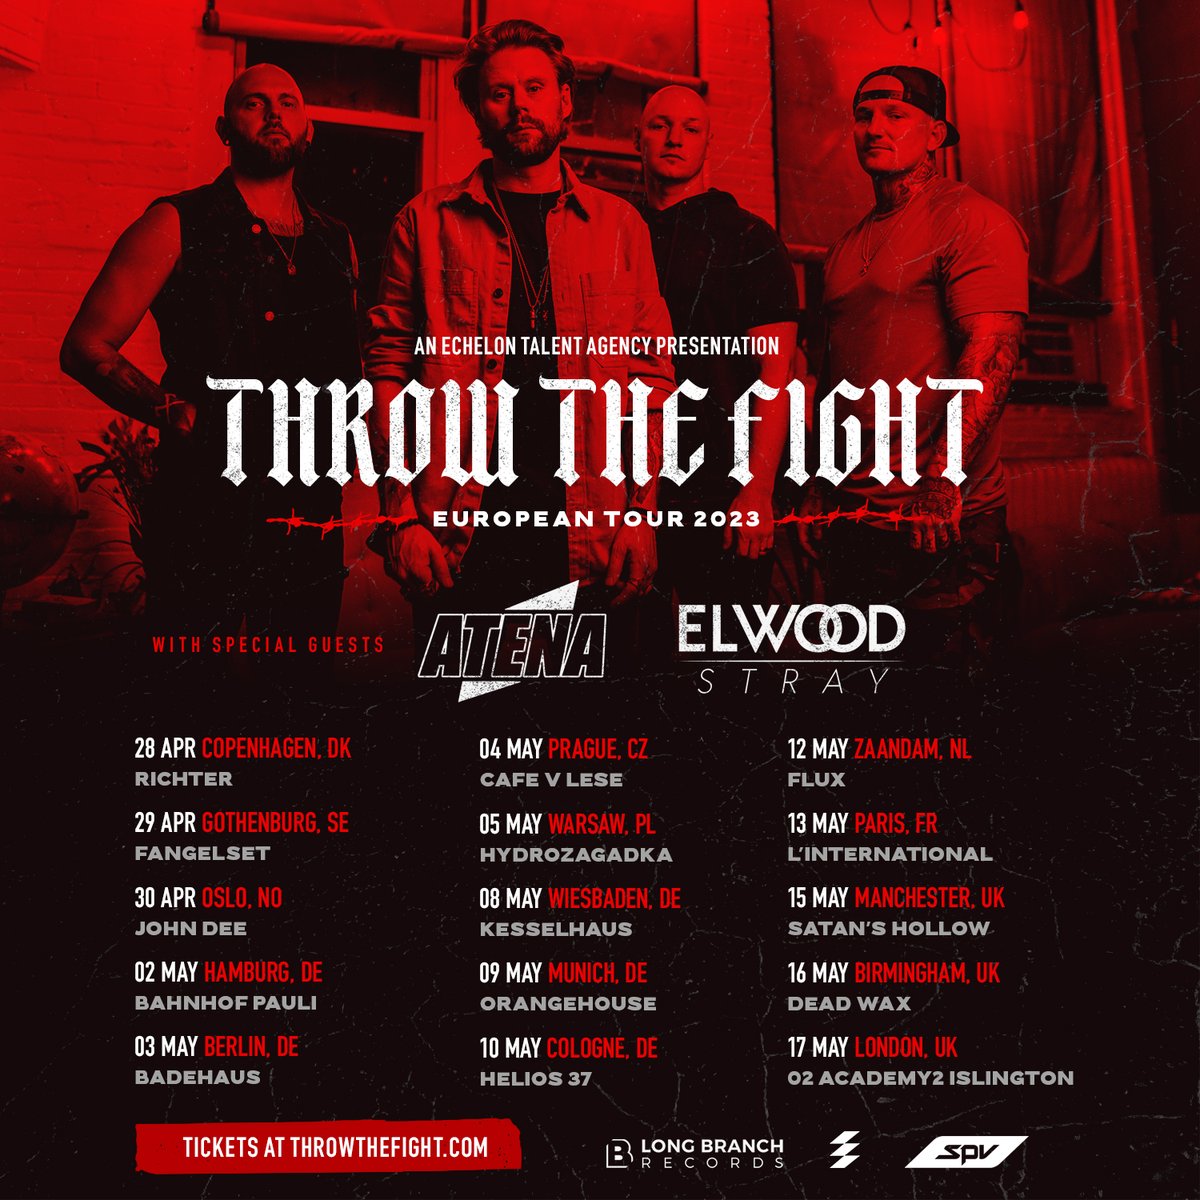 Tickets for our European tour with @elwood_stray and @atenaband are on sale now! 

🎟️ Hit the link for tix + info: 👇
throwthefight.com

Let's go!!